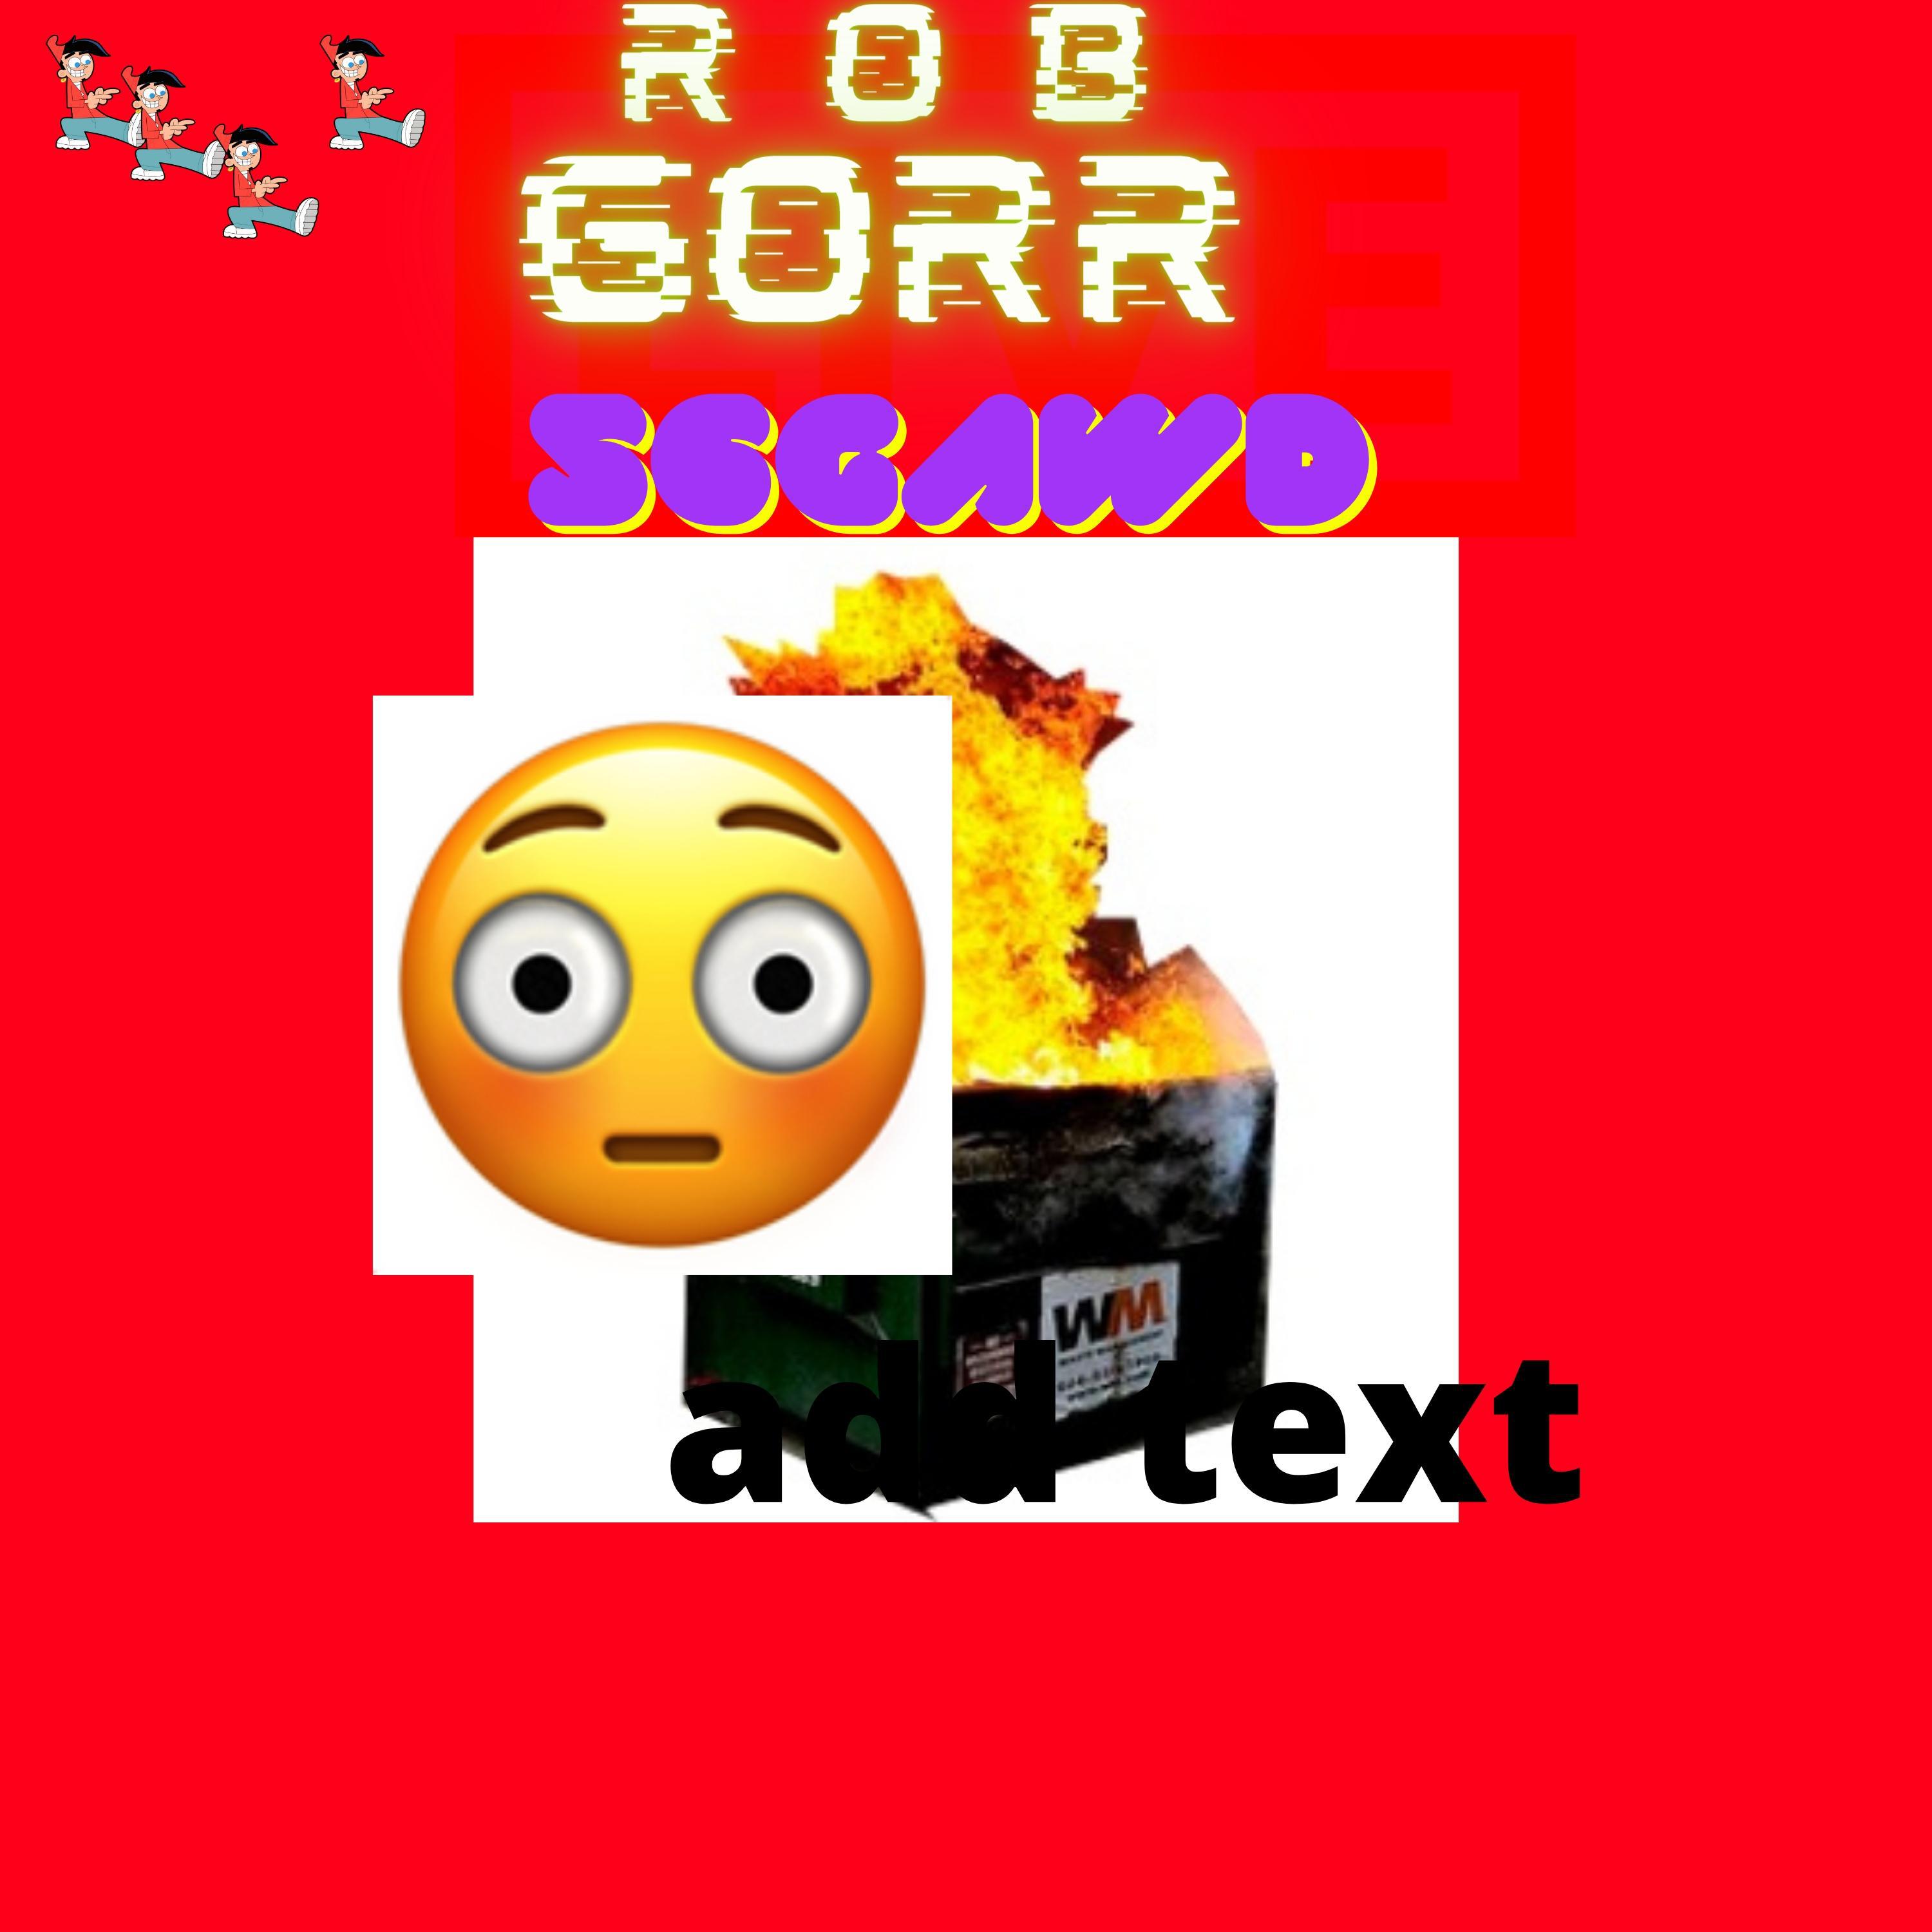 Rob Gorr - Click to Add Text (feat. 56gawd)